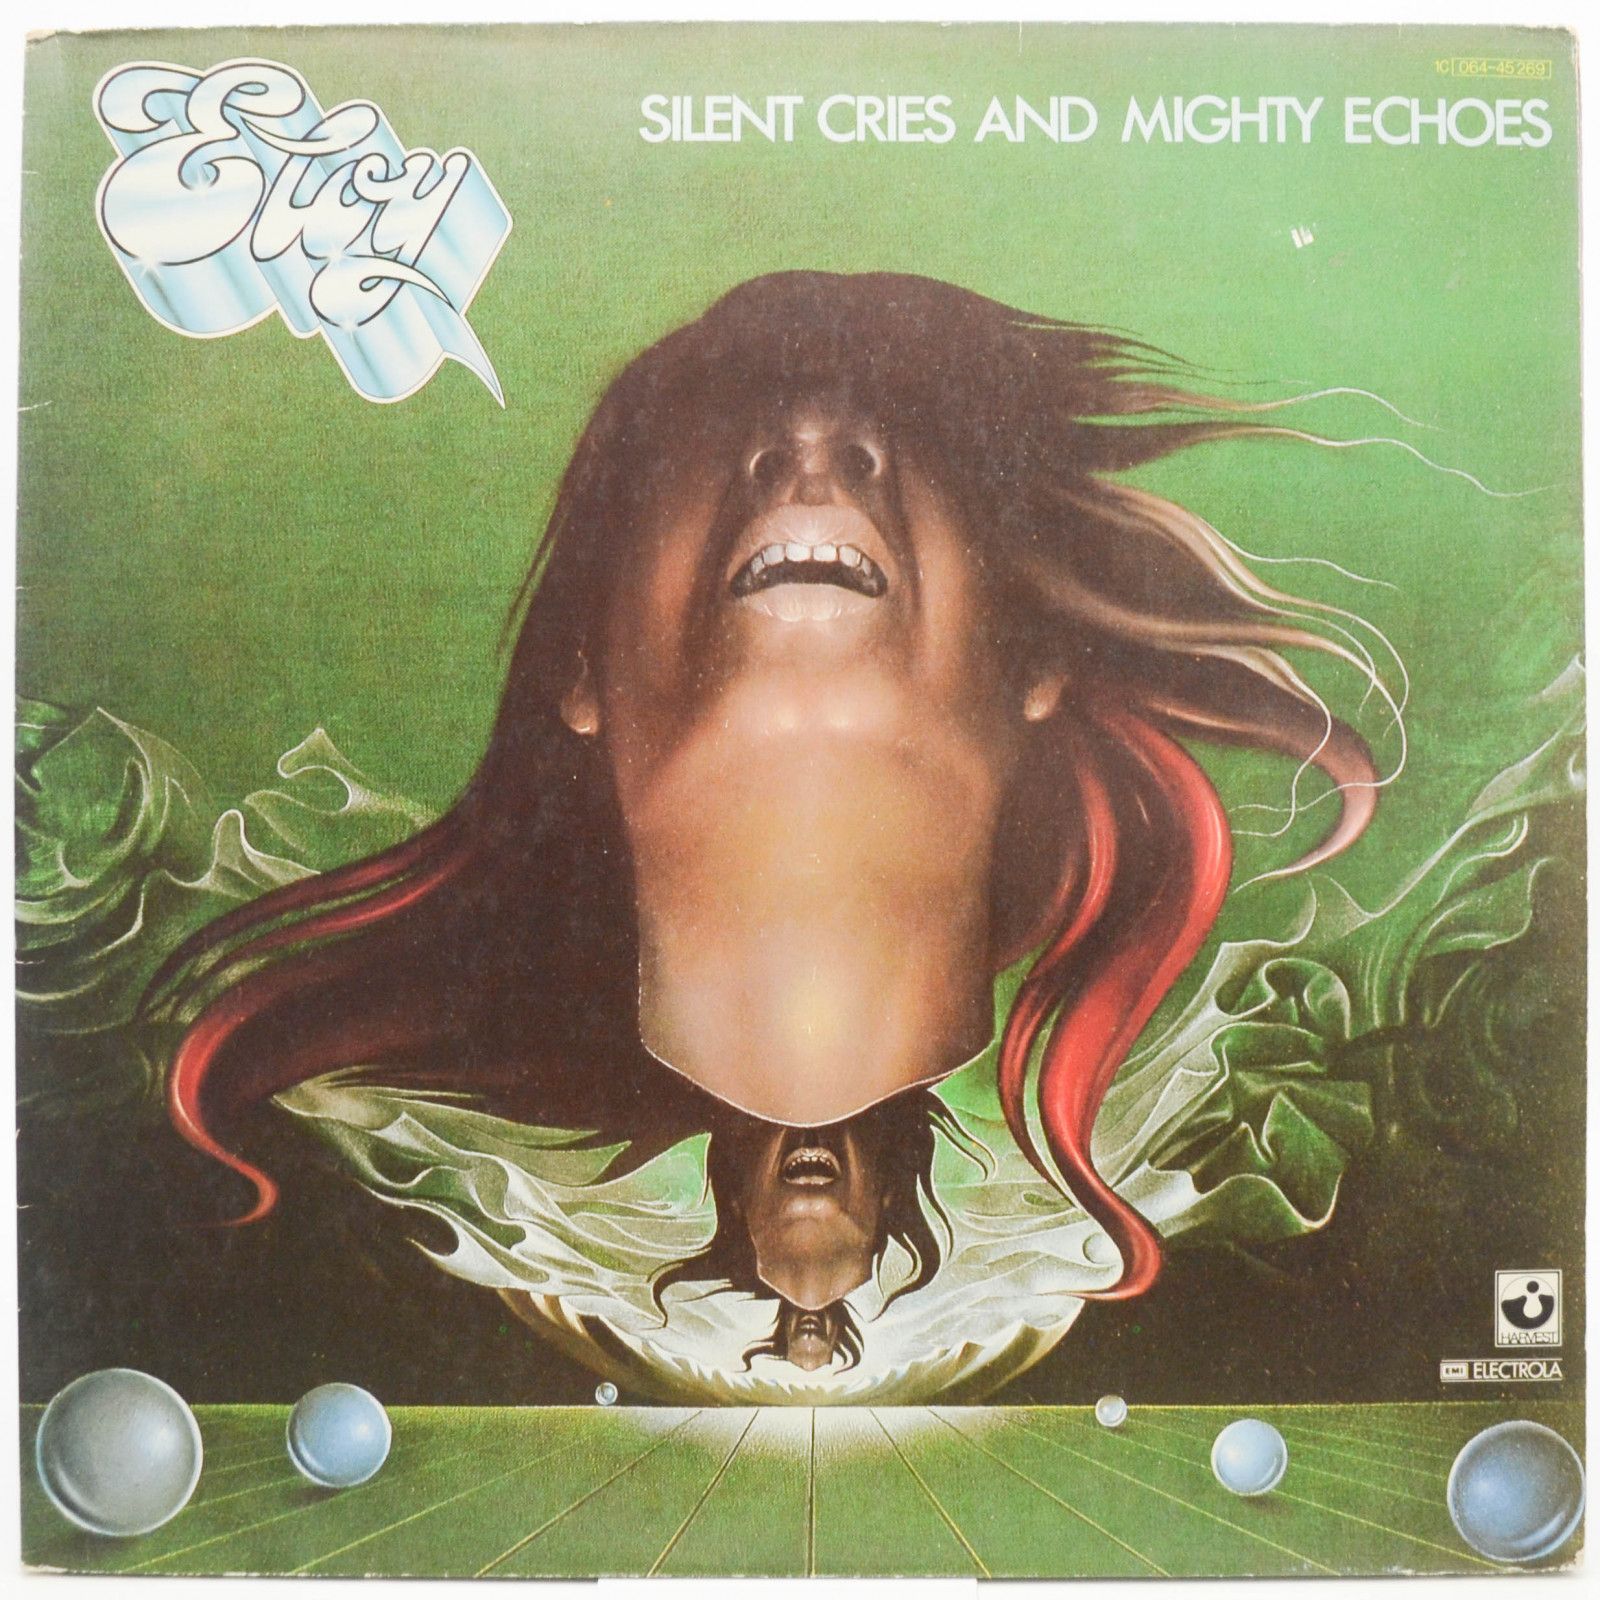 Eloy — Silent Cries And Mighty Echoes, 1979